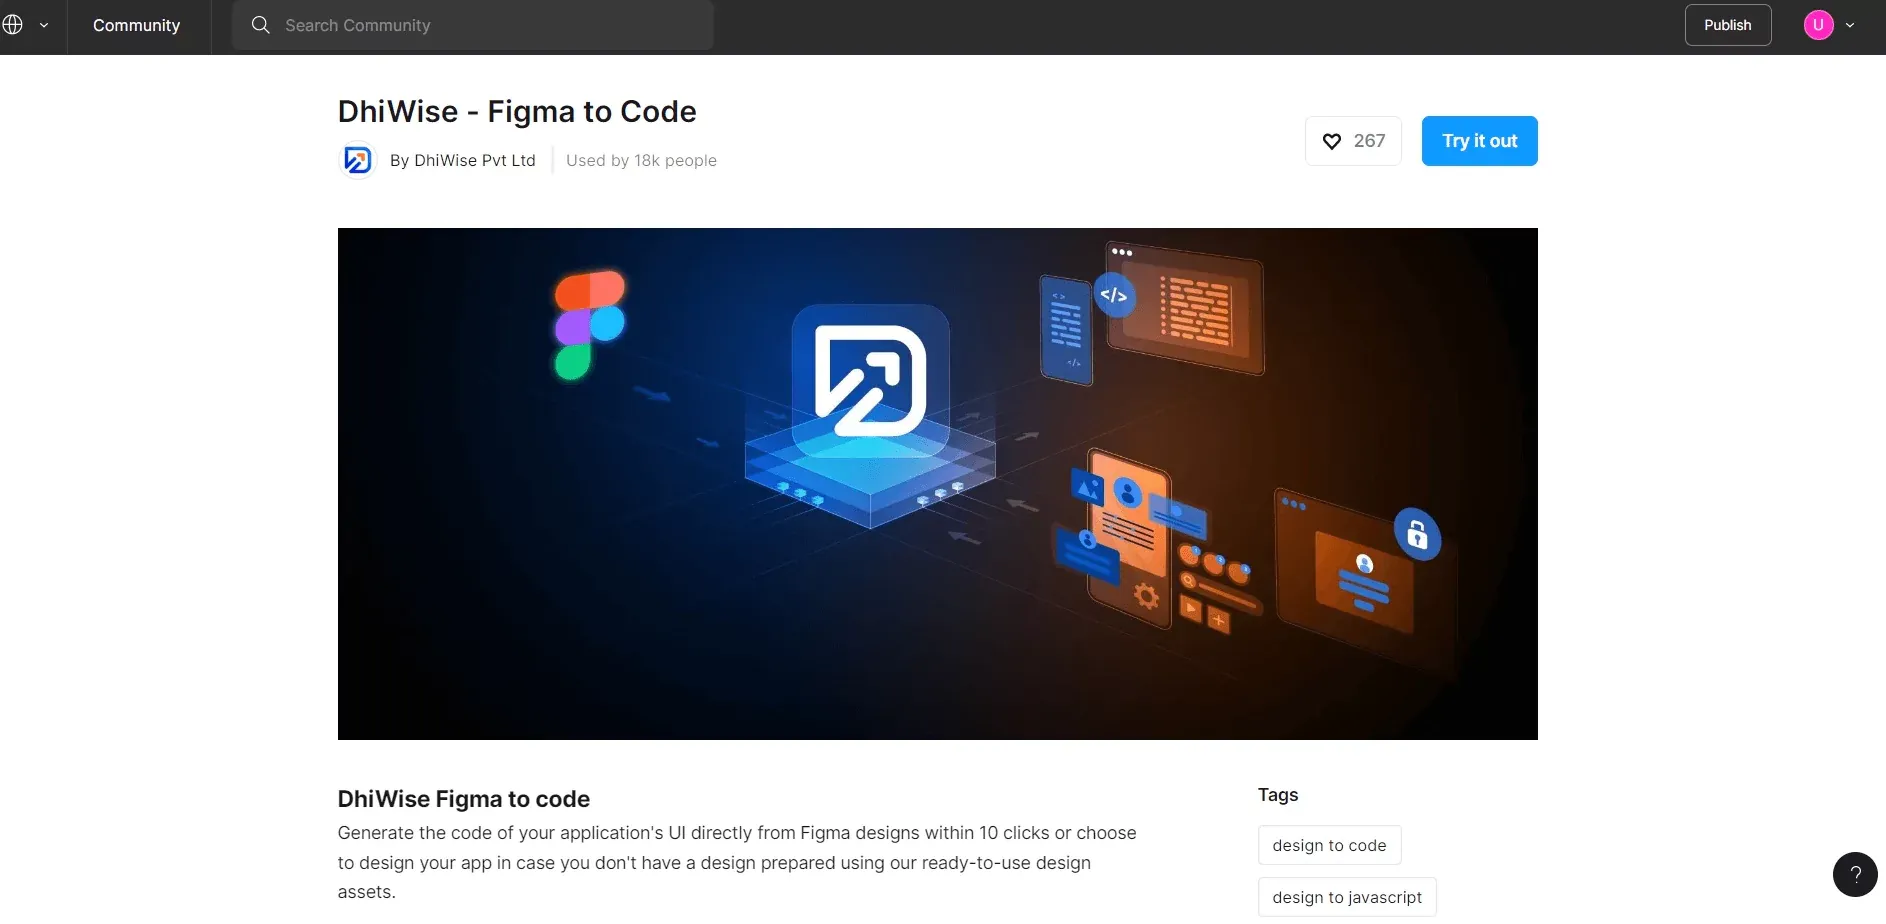 Install DhiWise Figma to Code